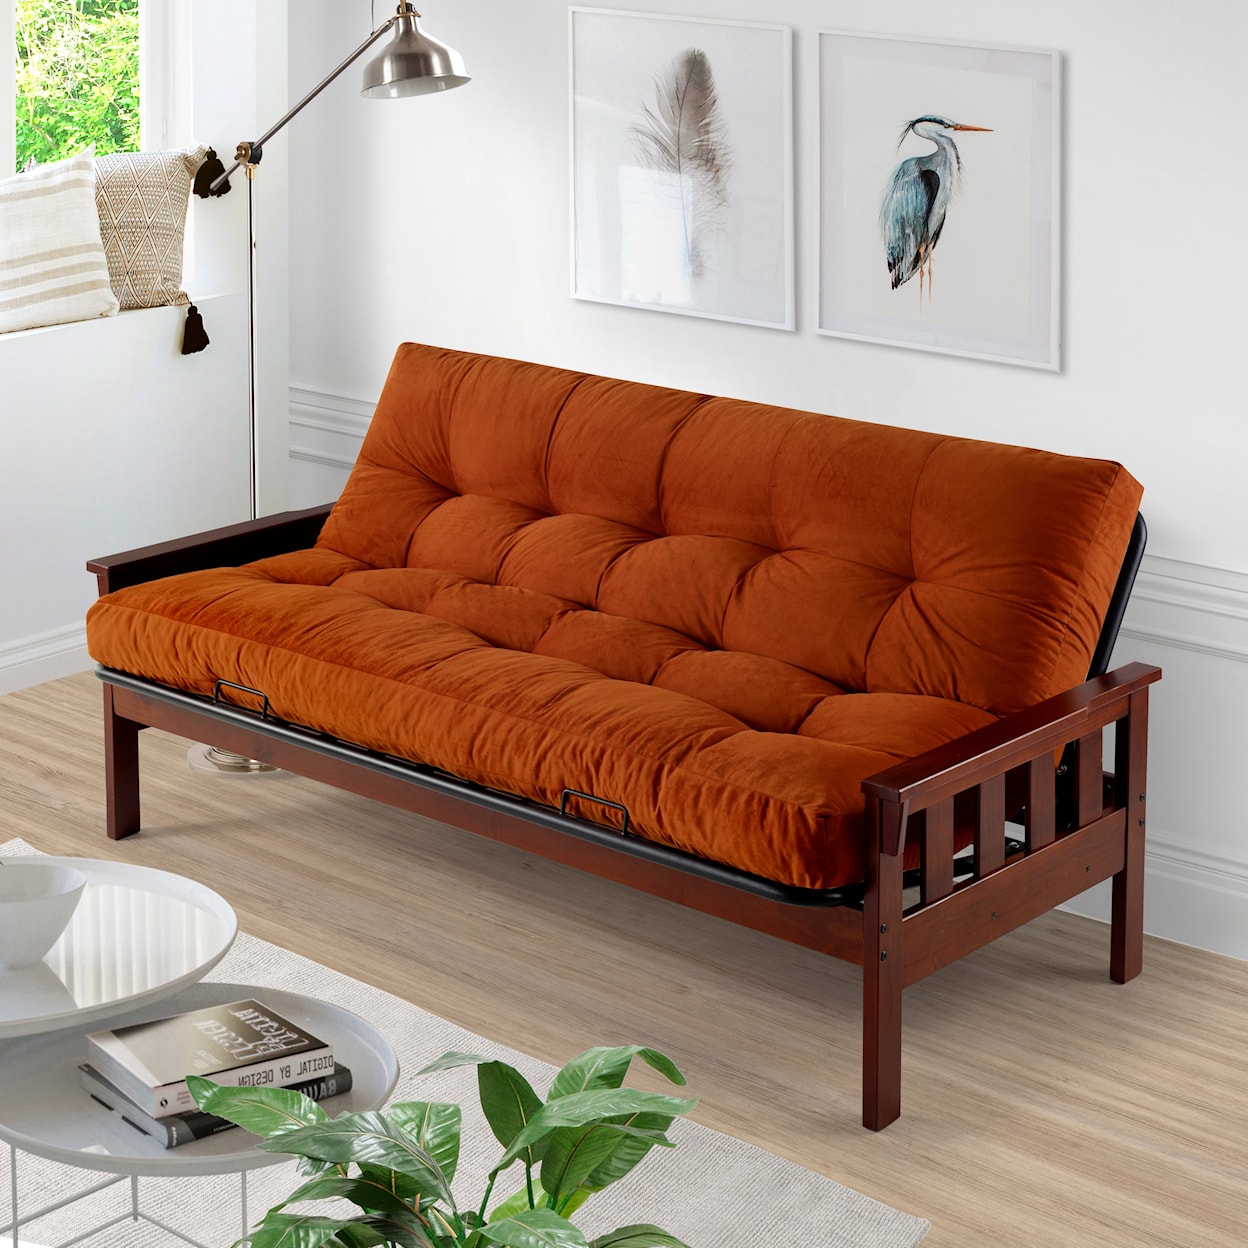 Canal House Daybeds and Futons Futon